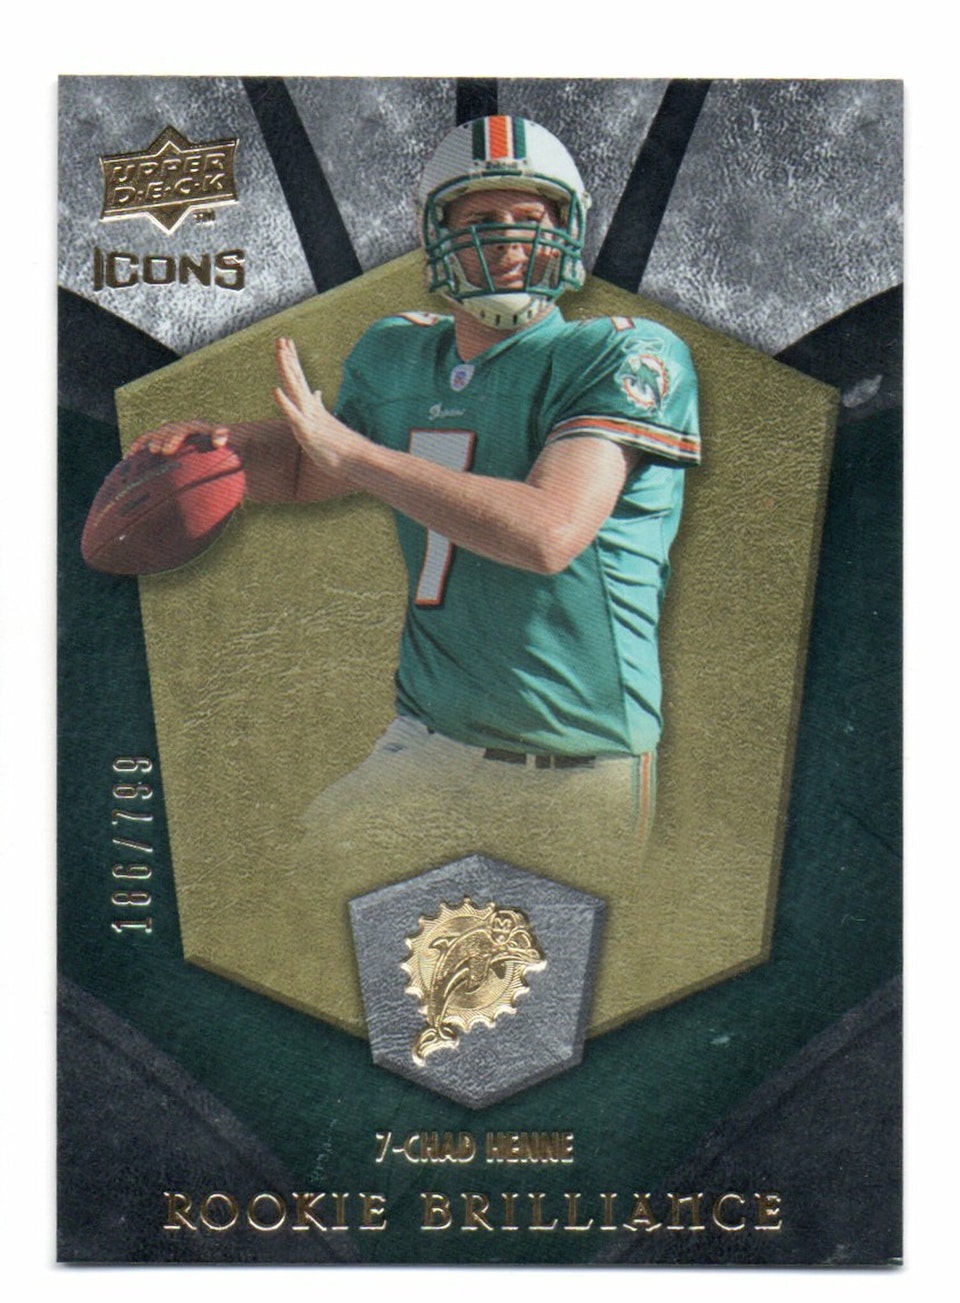 2008 Upper Deck Icons Rookie Brilliance Silver #RB4 Chad Henne (20-217x9-NFLDOLPHINS)